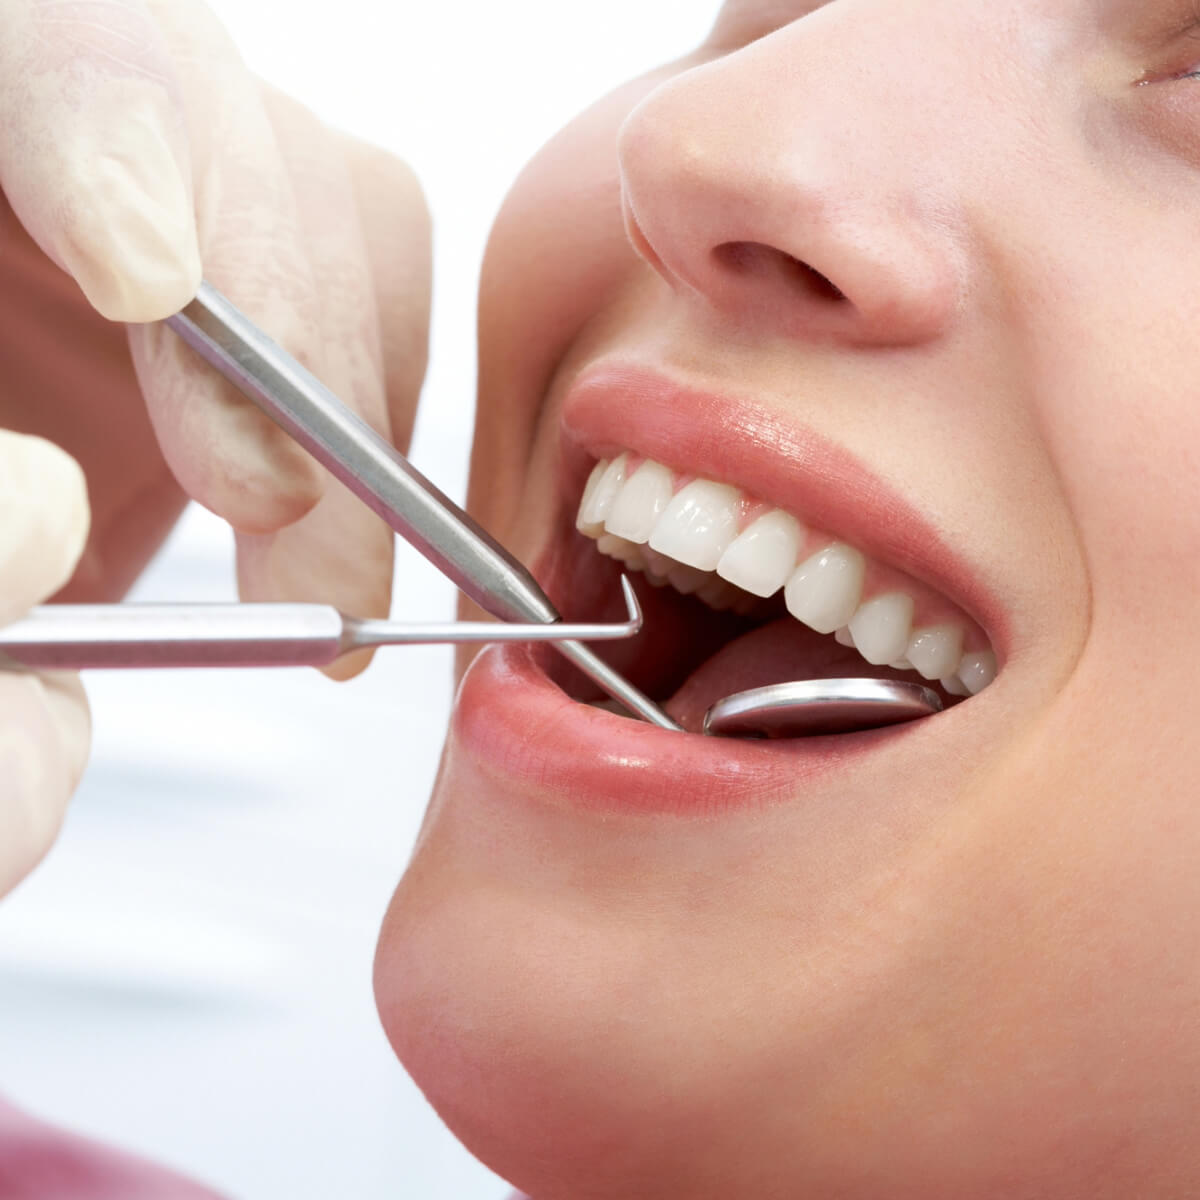 root canal retreatment in San Antonio TX area